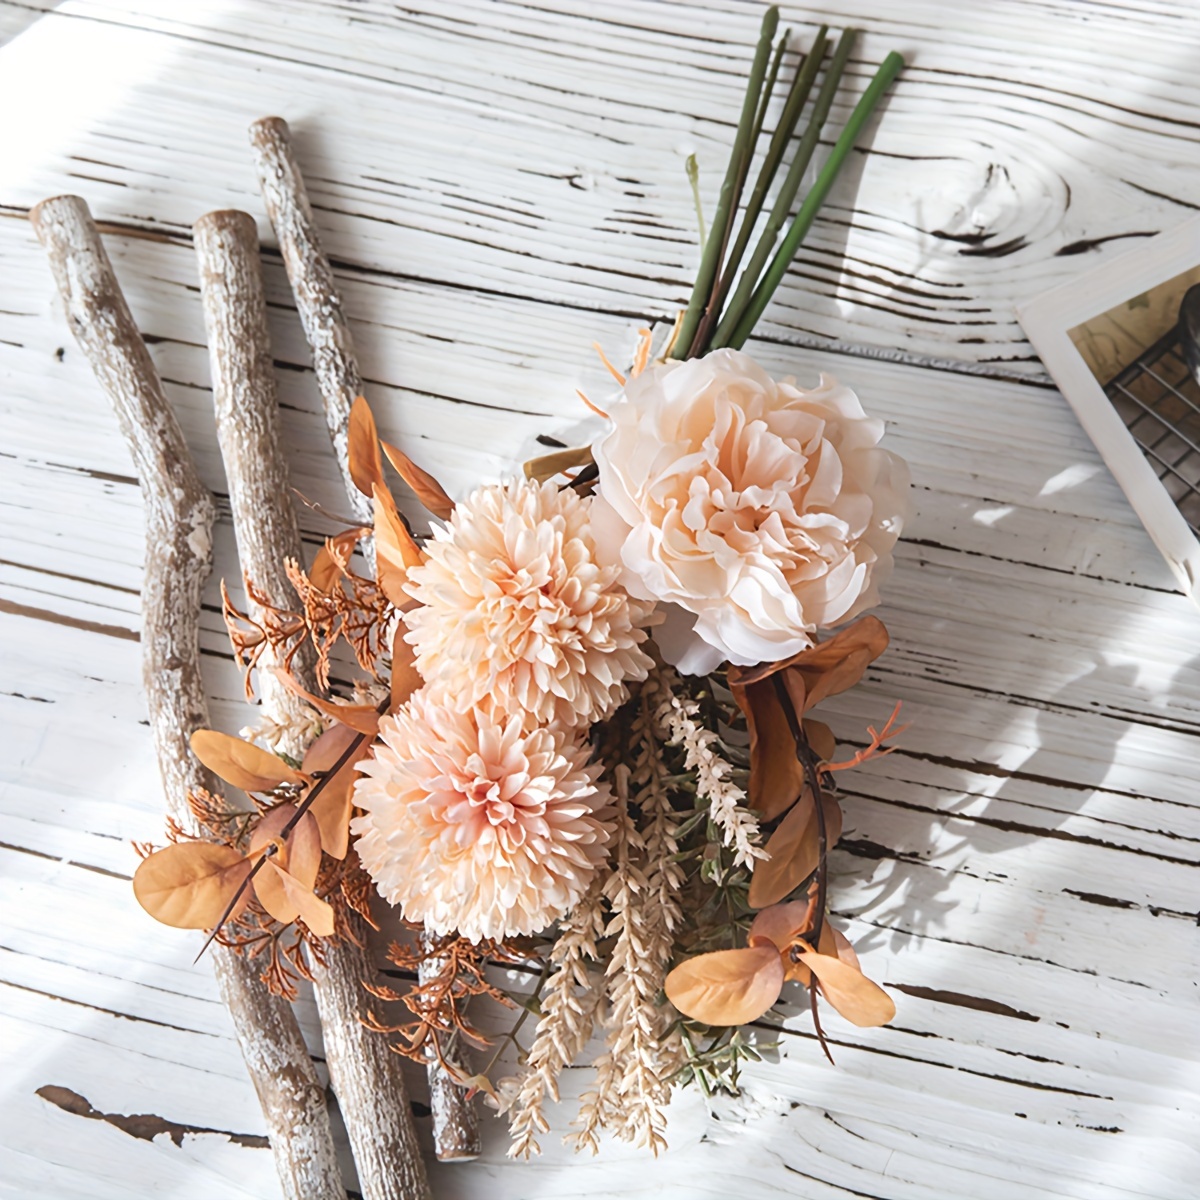 How to Decorate with Faux Flowers and Greenery in Winter